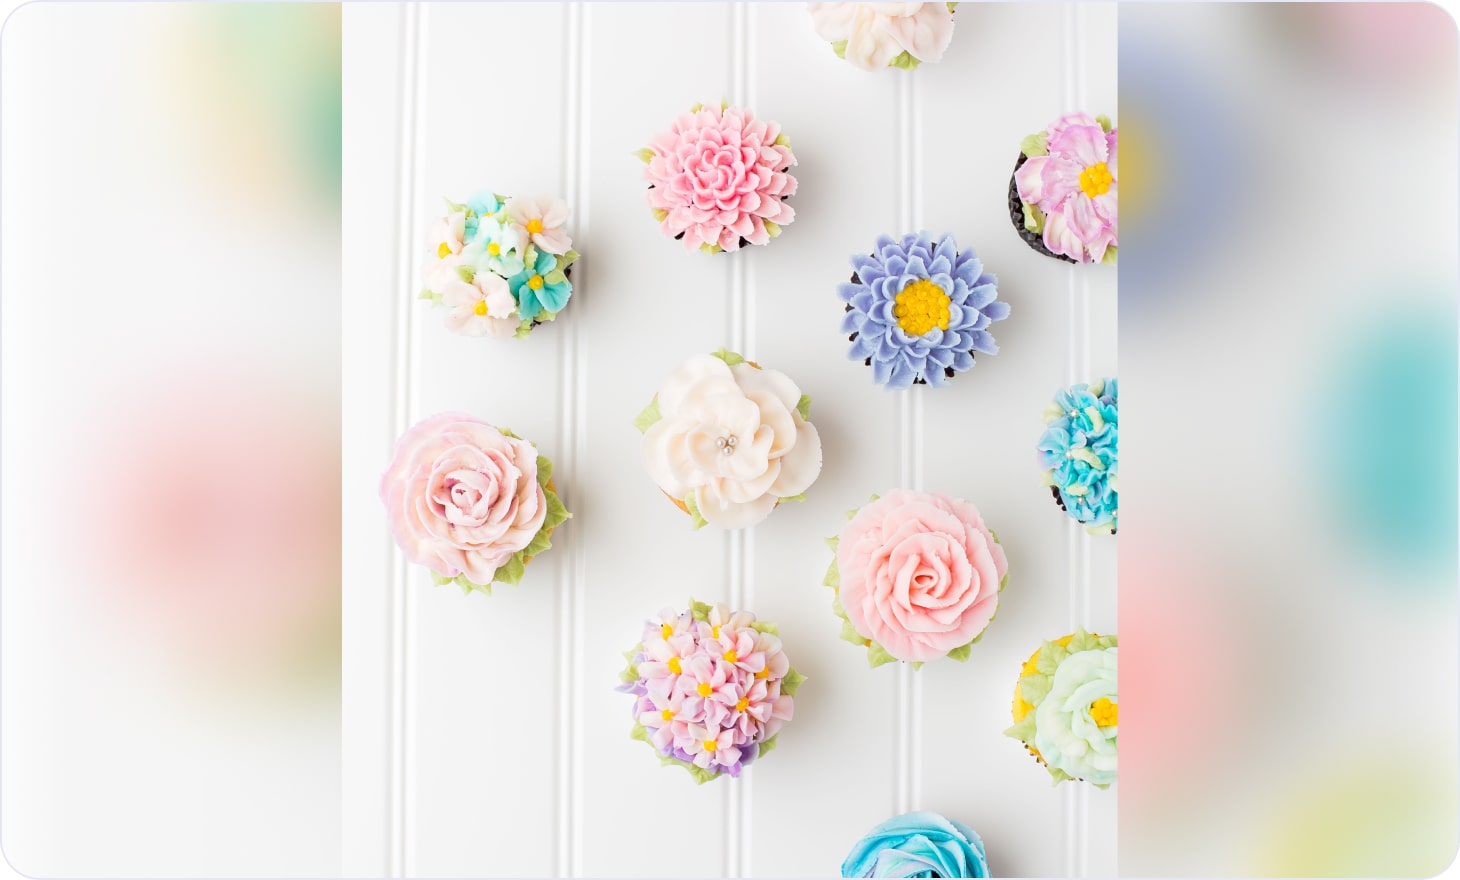 Decorated vanilla cupcakes in the shape of flowers